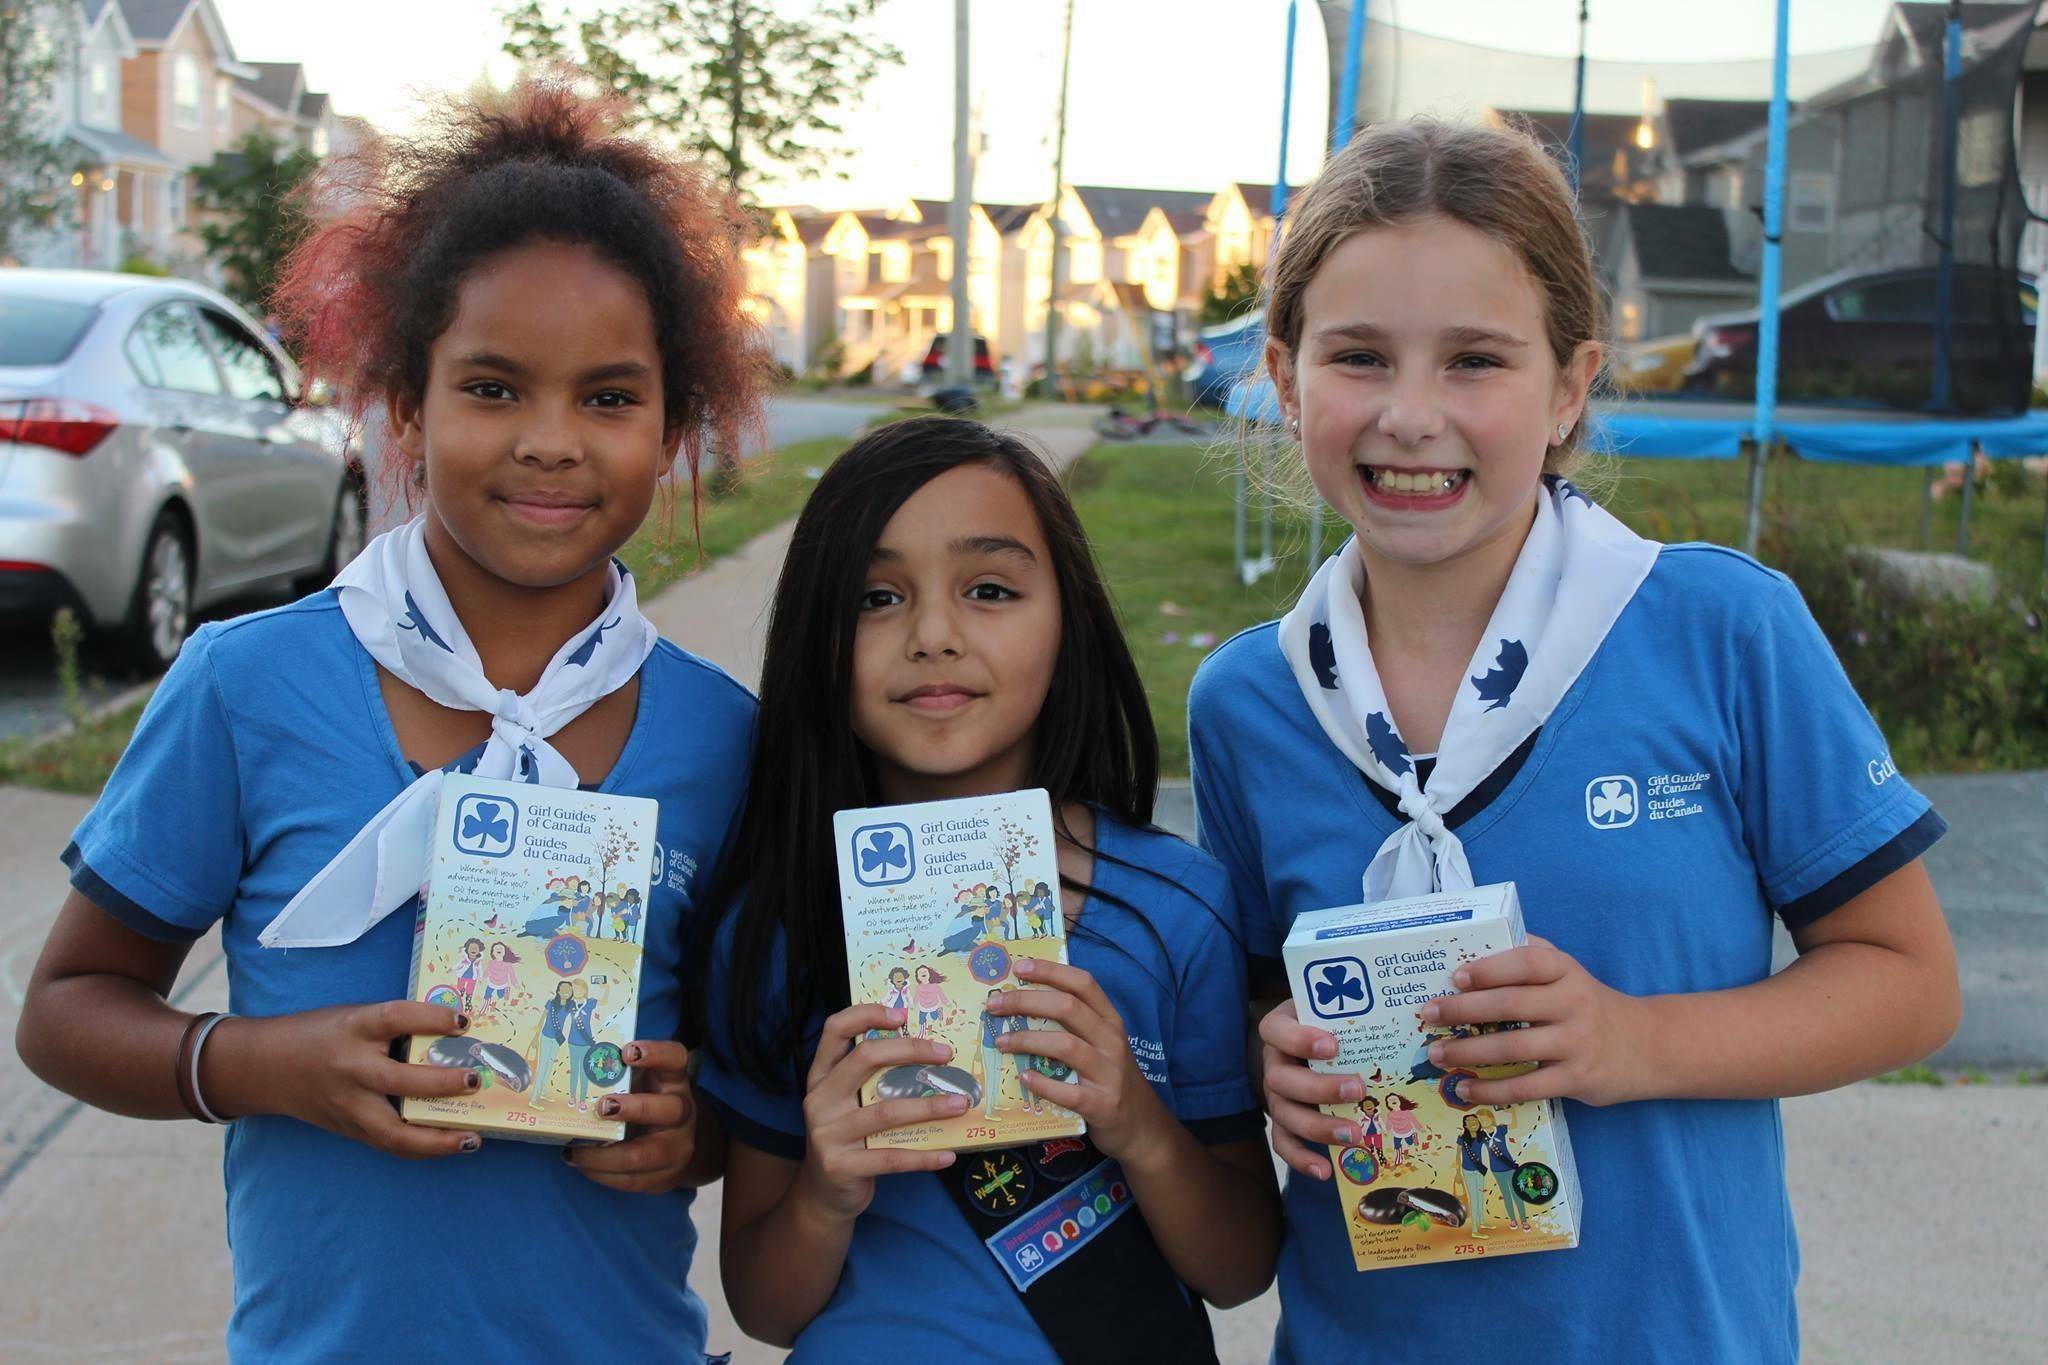 Girl First changes on the horizon for Girl Guides